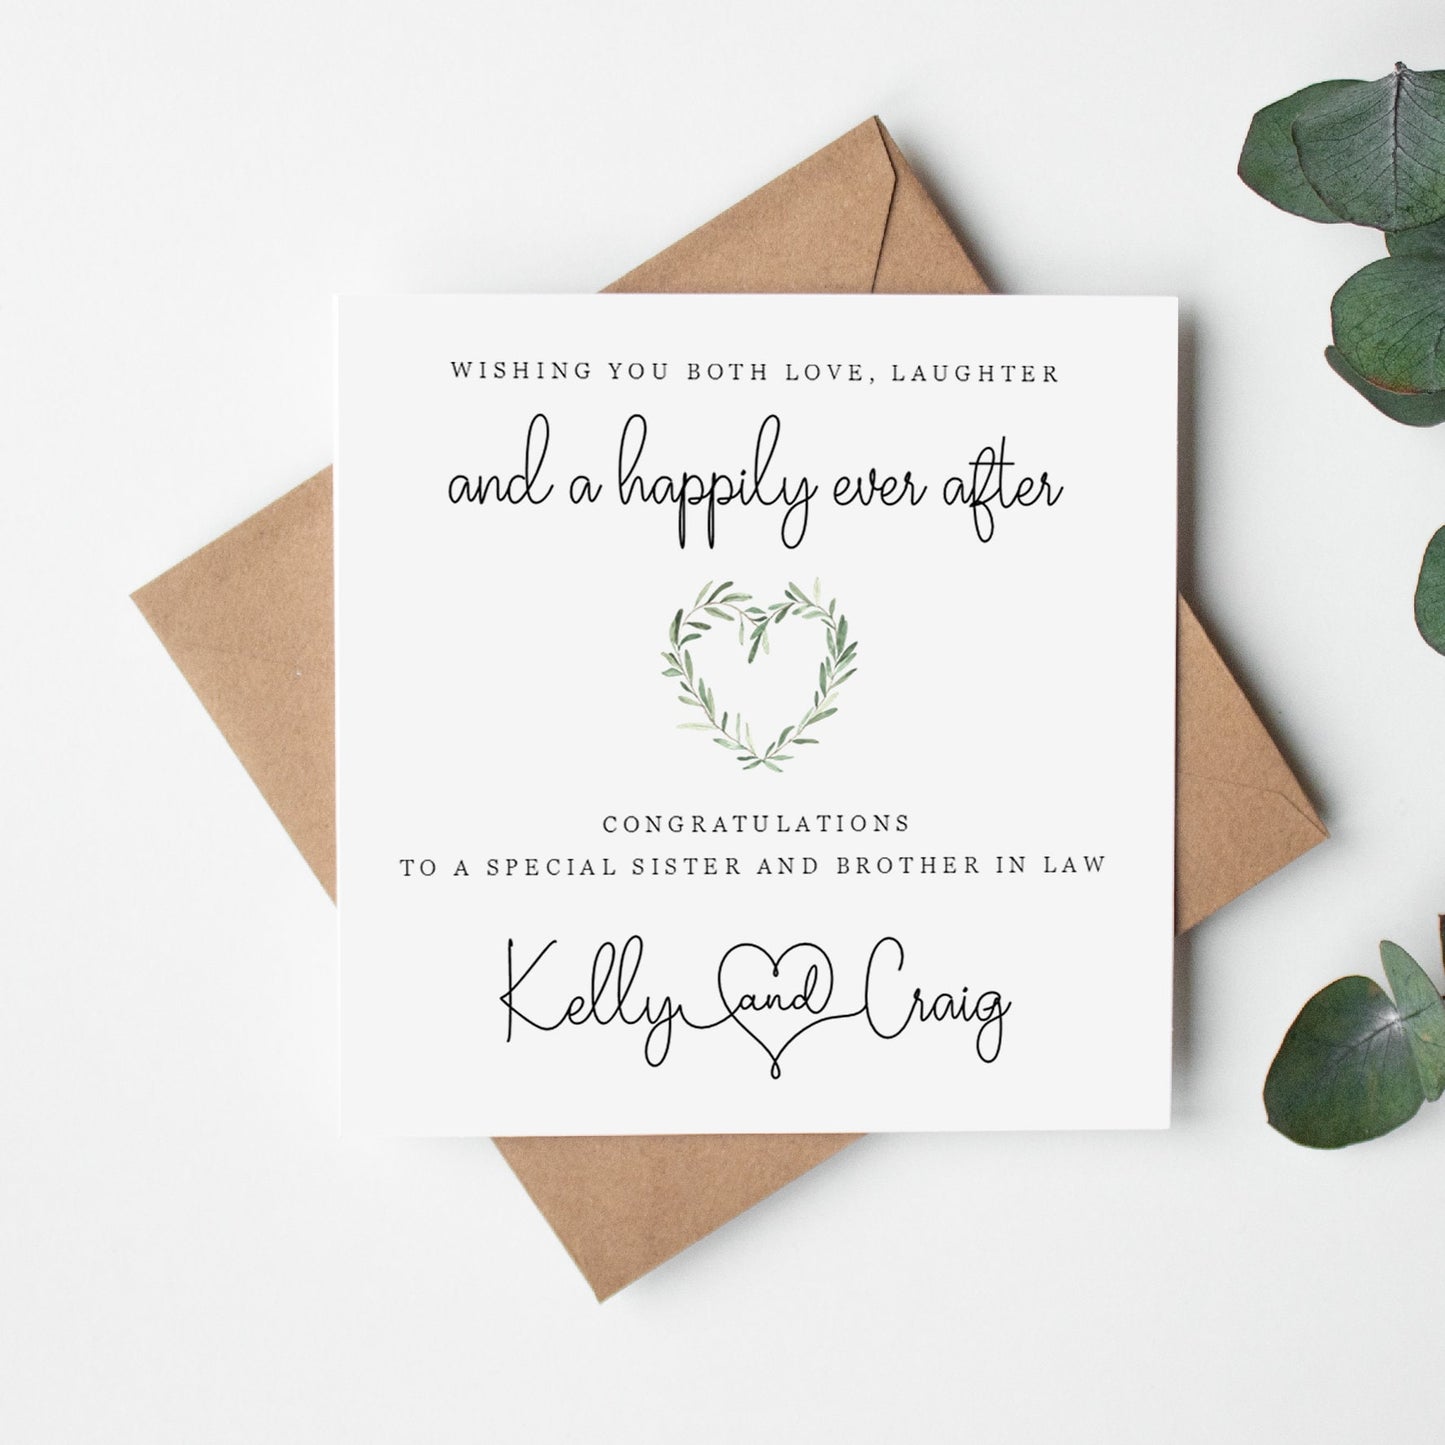 Wedding Card for Sister and Brother in Law - Botanical Greenery Leaves